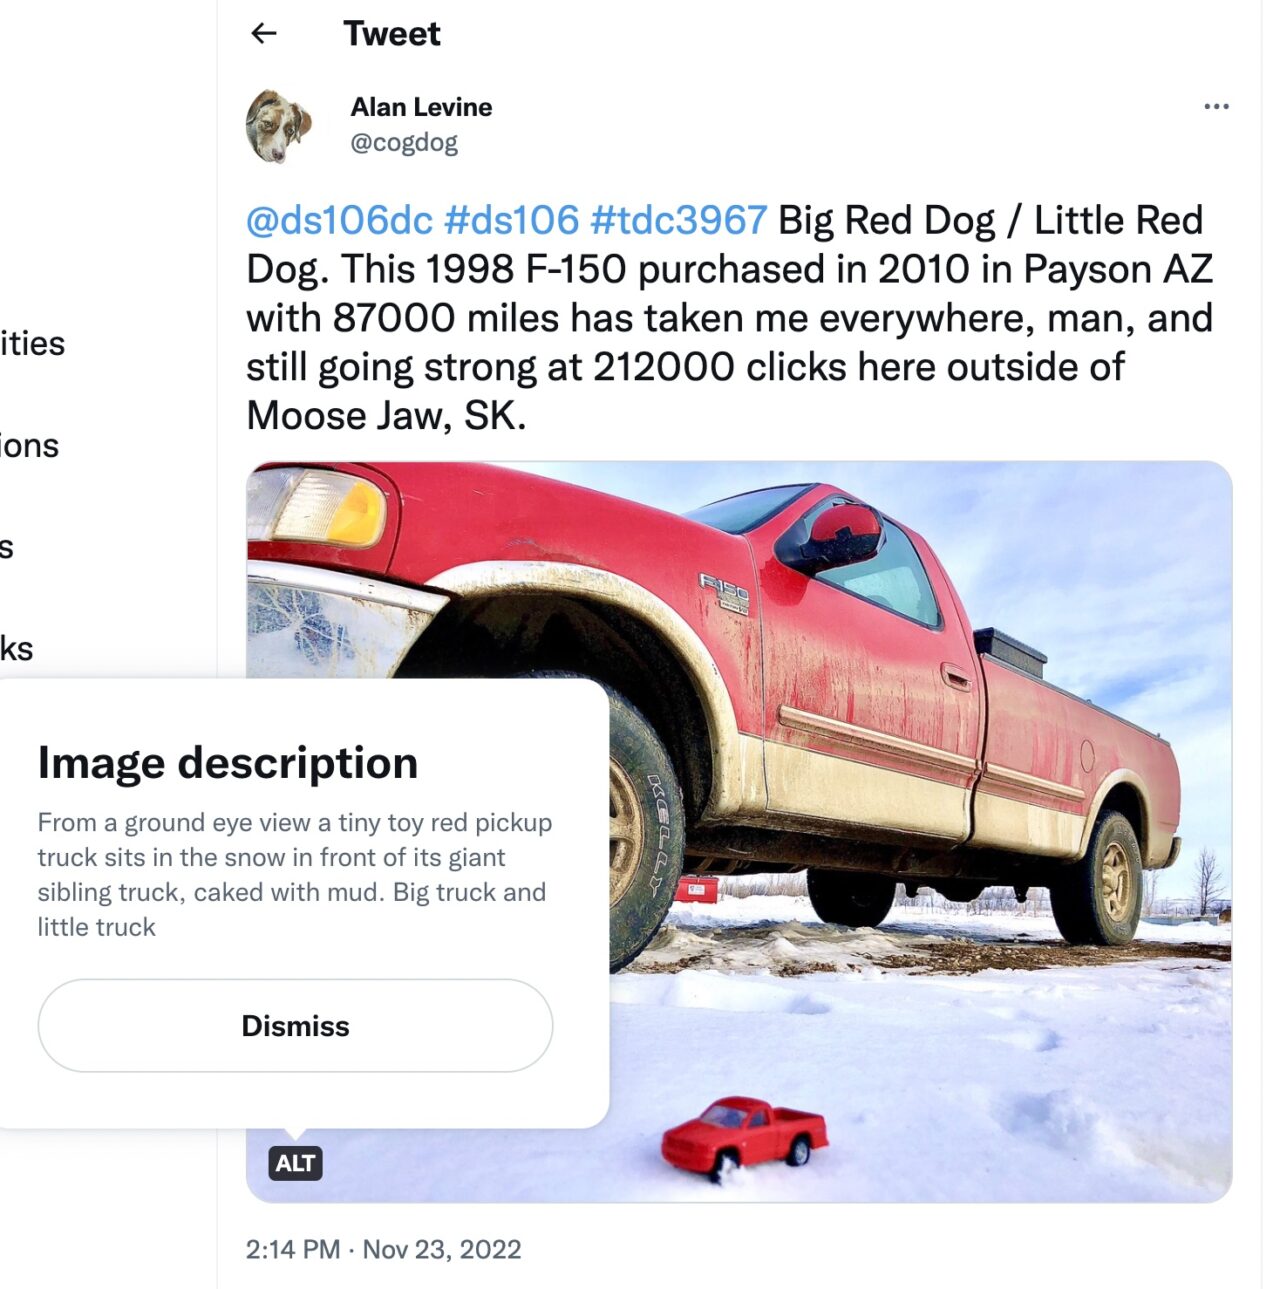 Perhaps a bit meta, but an example of a tweeted image where the ALT icon indicates presence of alt text, and for those with vision, that Image description is not only shown, but is text I can copy paste here -- https://twitter.com/cogdog/status/1595511226712588288